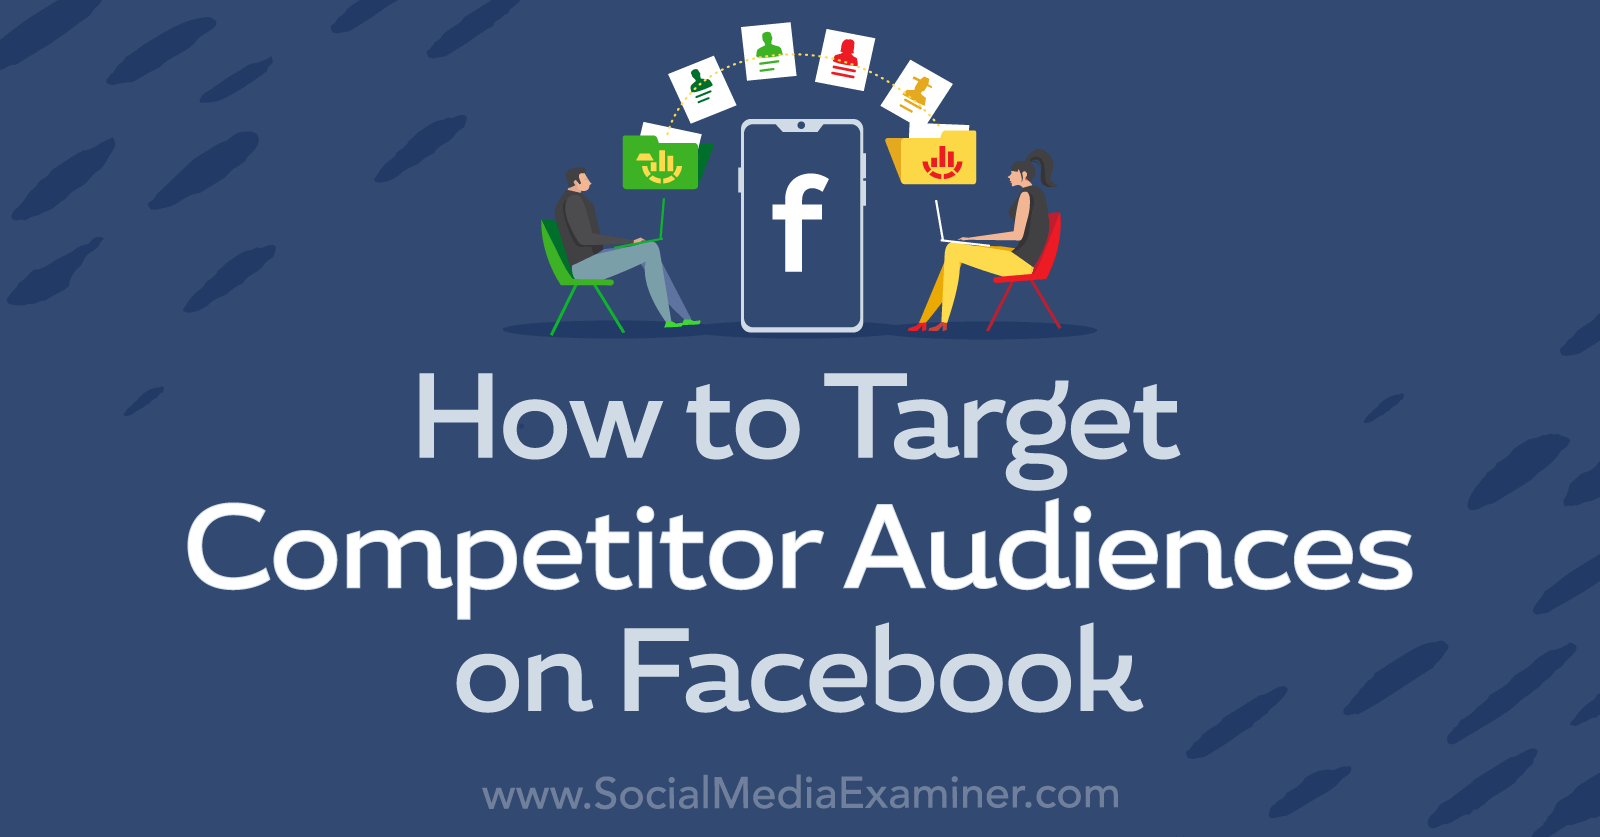 How to Target Competitor Audiences on Facebook-Social Media Examiner